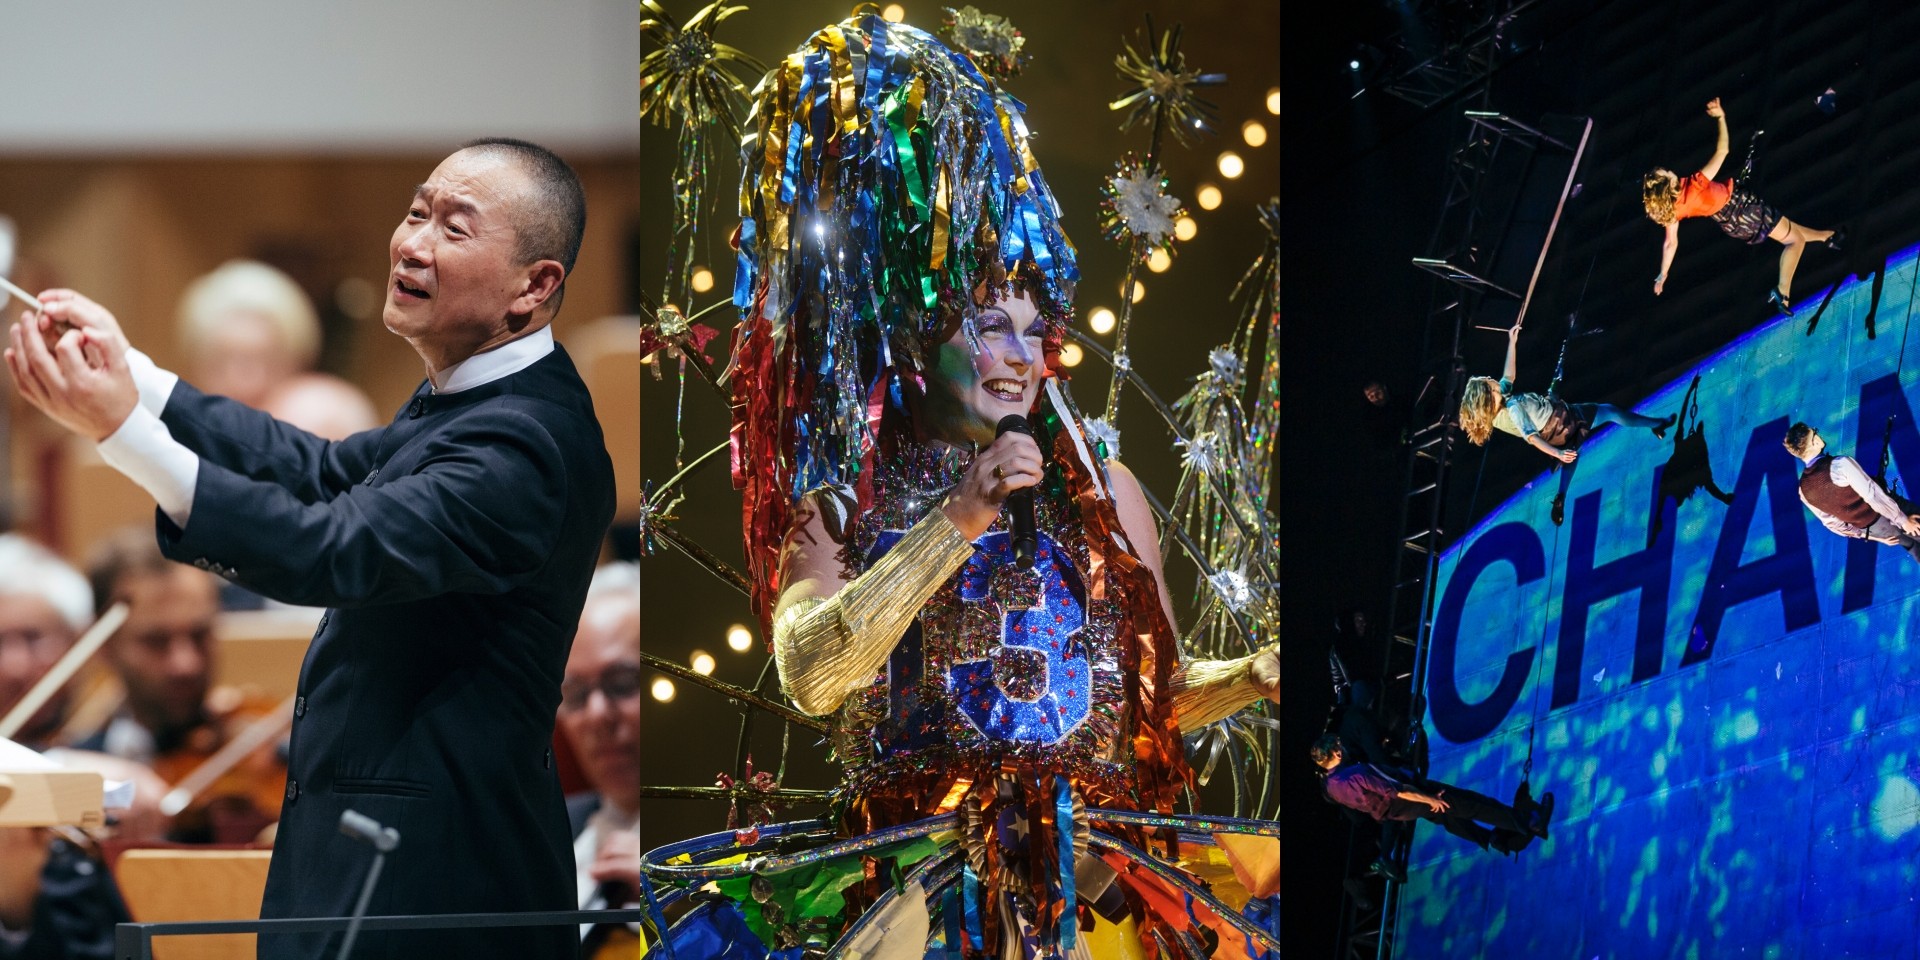 SIFA 2020 announces its musical line-up - Tan Dun, Taylor Mac, Wired Aerial Theatre, and more  